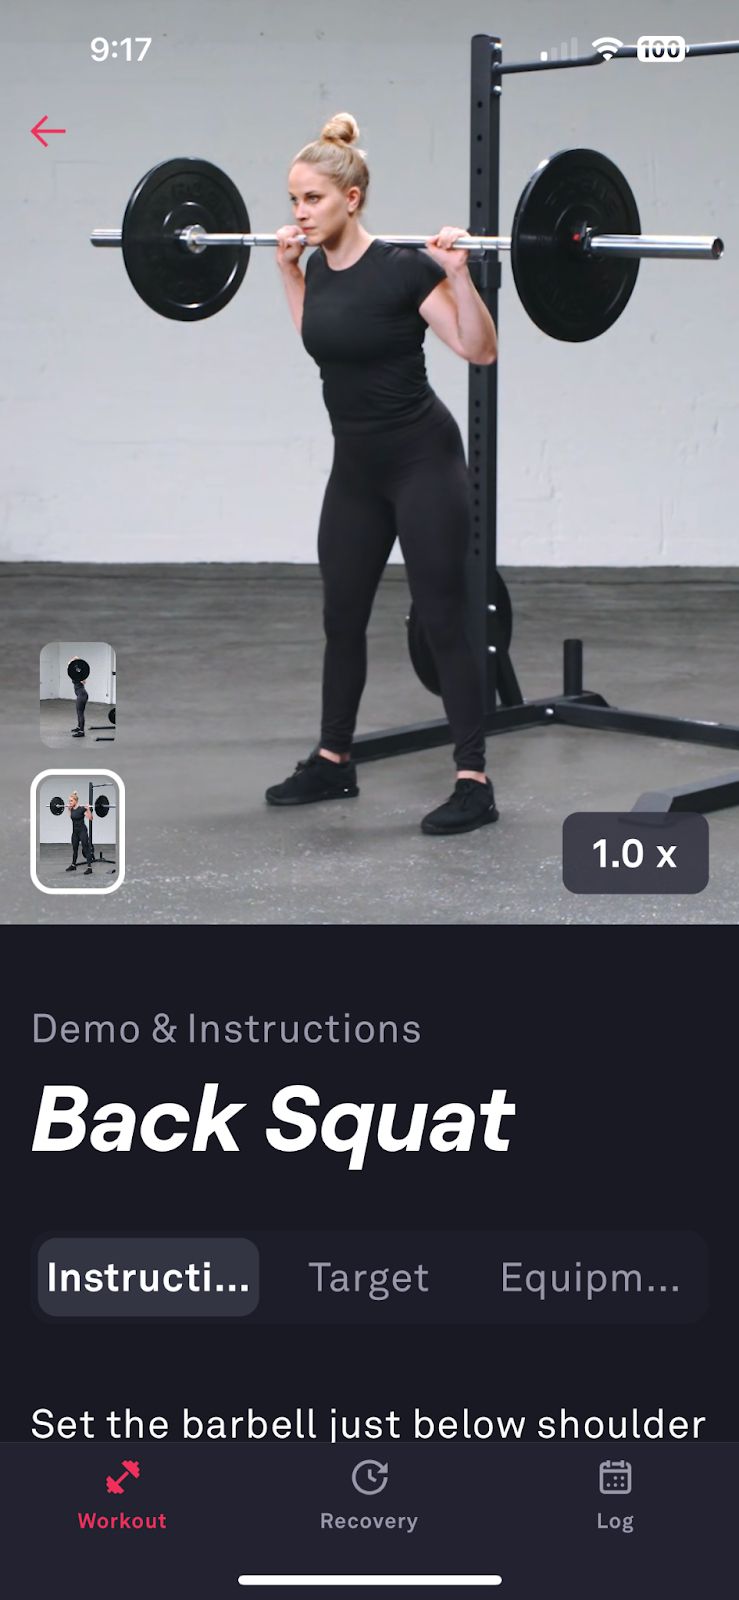 Fitbod Review - backsquat video